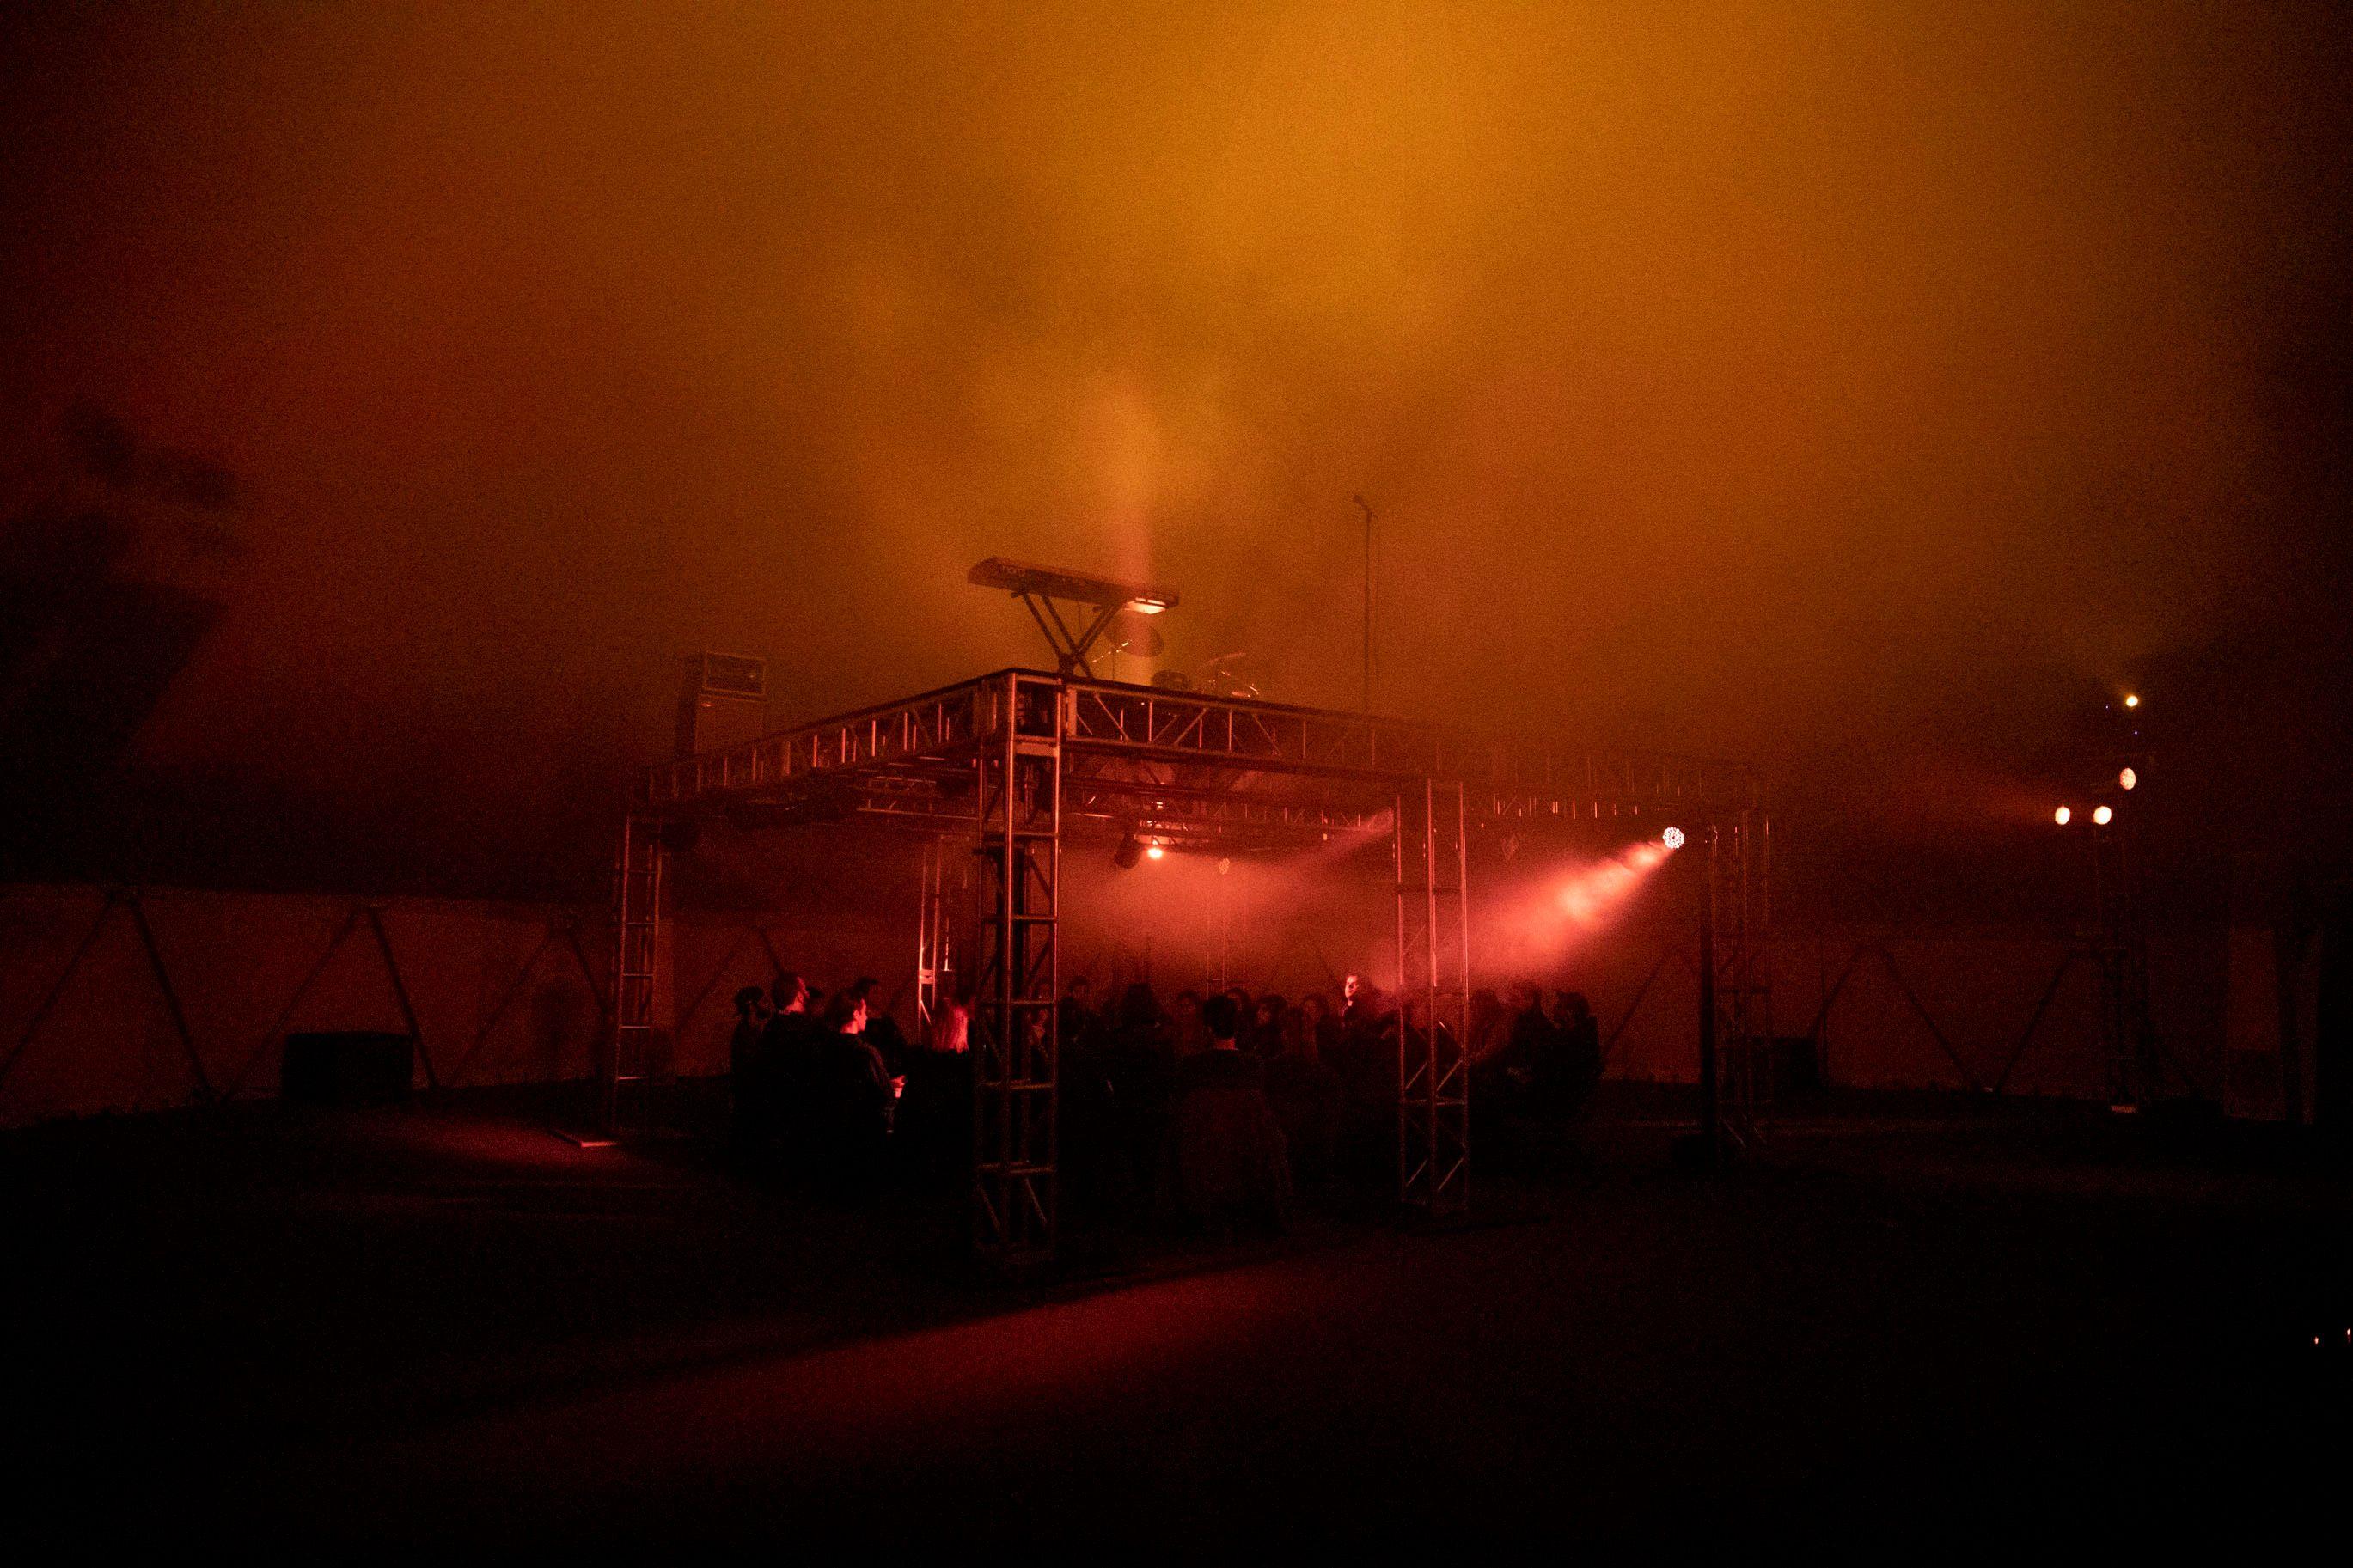 People surrounding a stage setup with lights and scaffolding. There is fog pervading the scene. Red and orange lights make the fog glow.